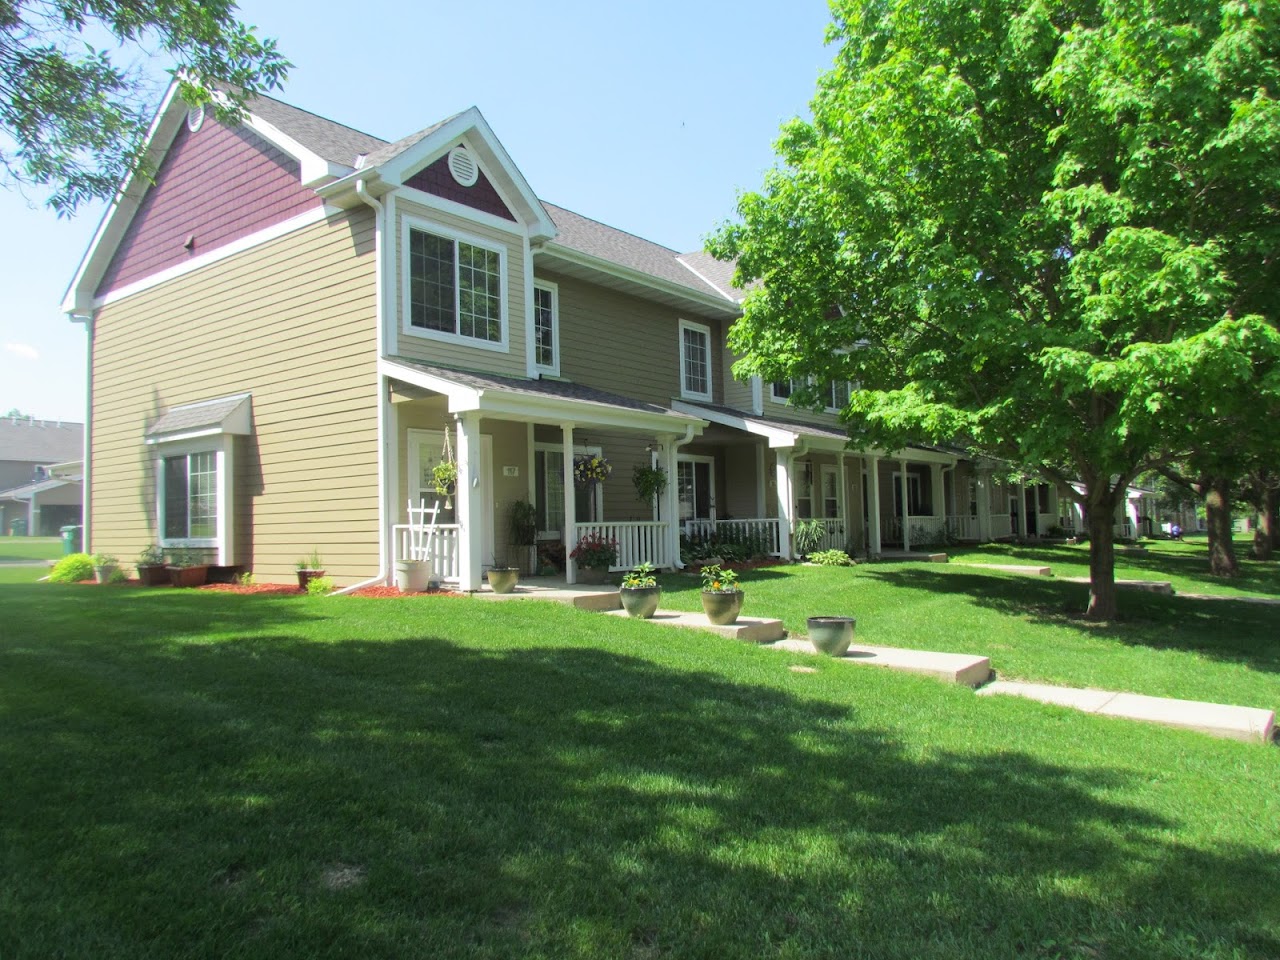 Photo of BRIDGE RUN TOWNHOMES. Affordable housing located at MULTIPLE BUILDING ADDRESSES CANNON FALLS, MN 55009